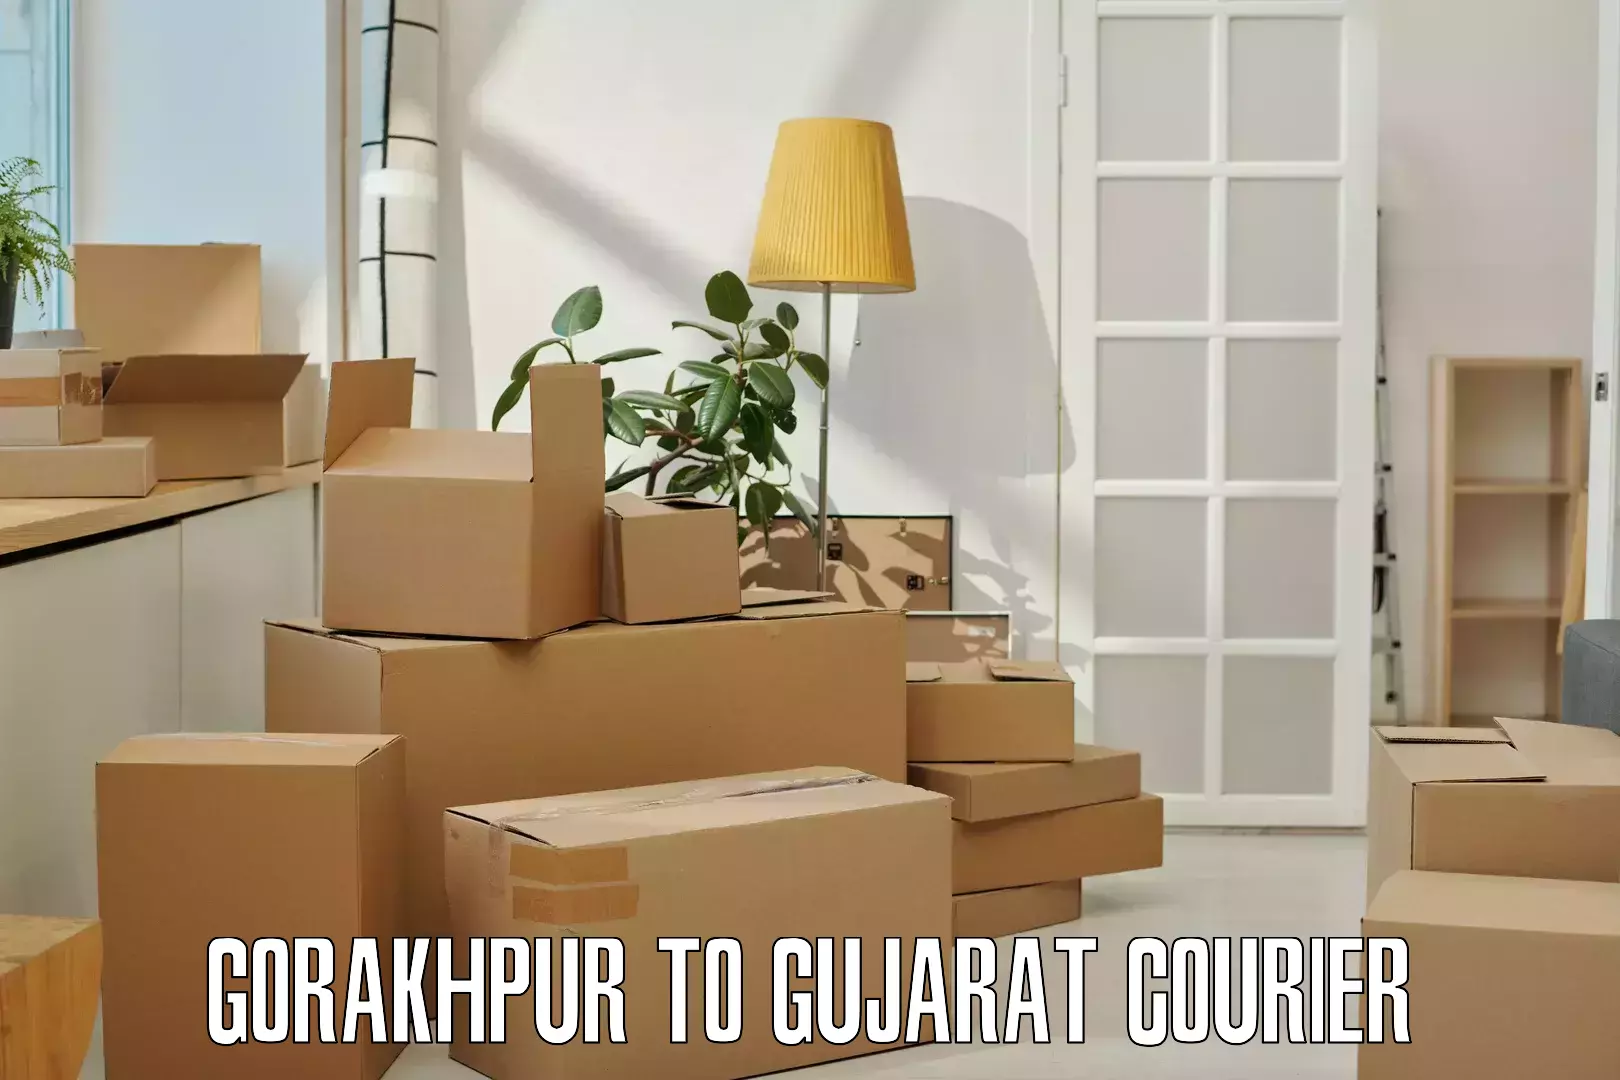 Discounted shipping Gorakhpur to Anand